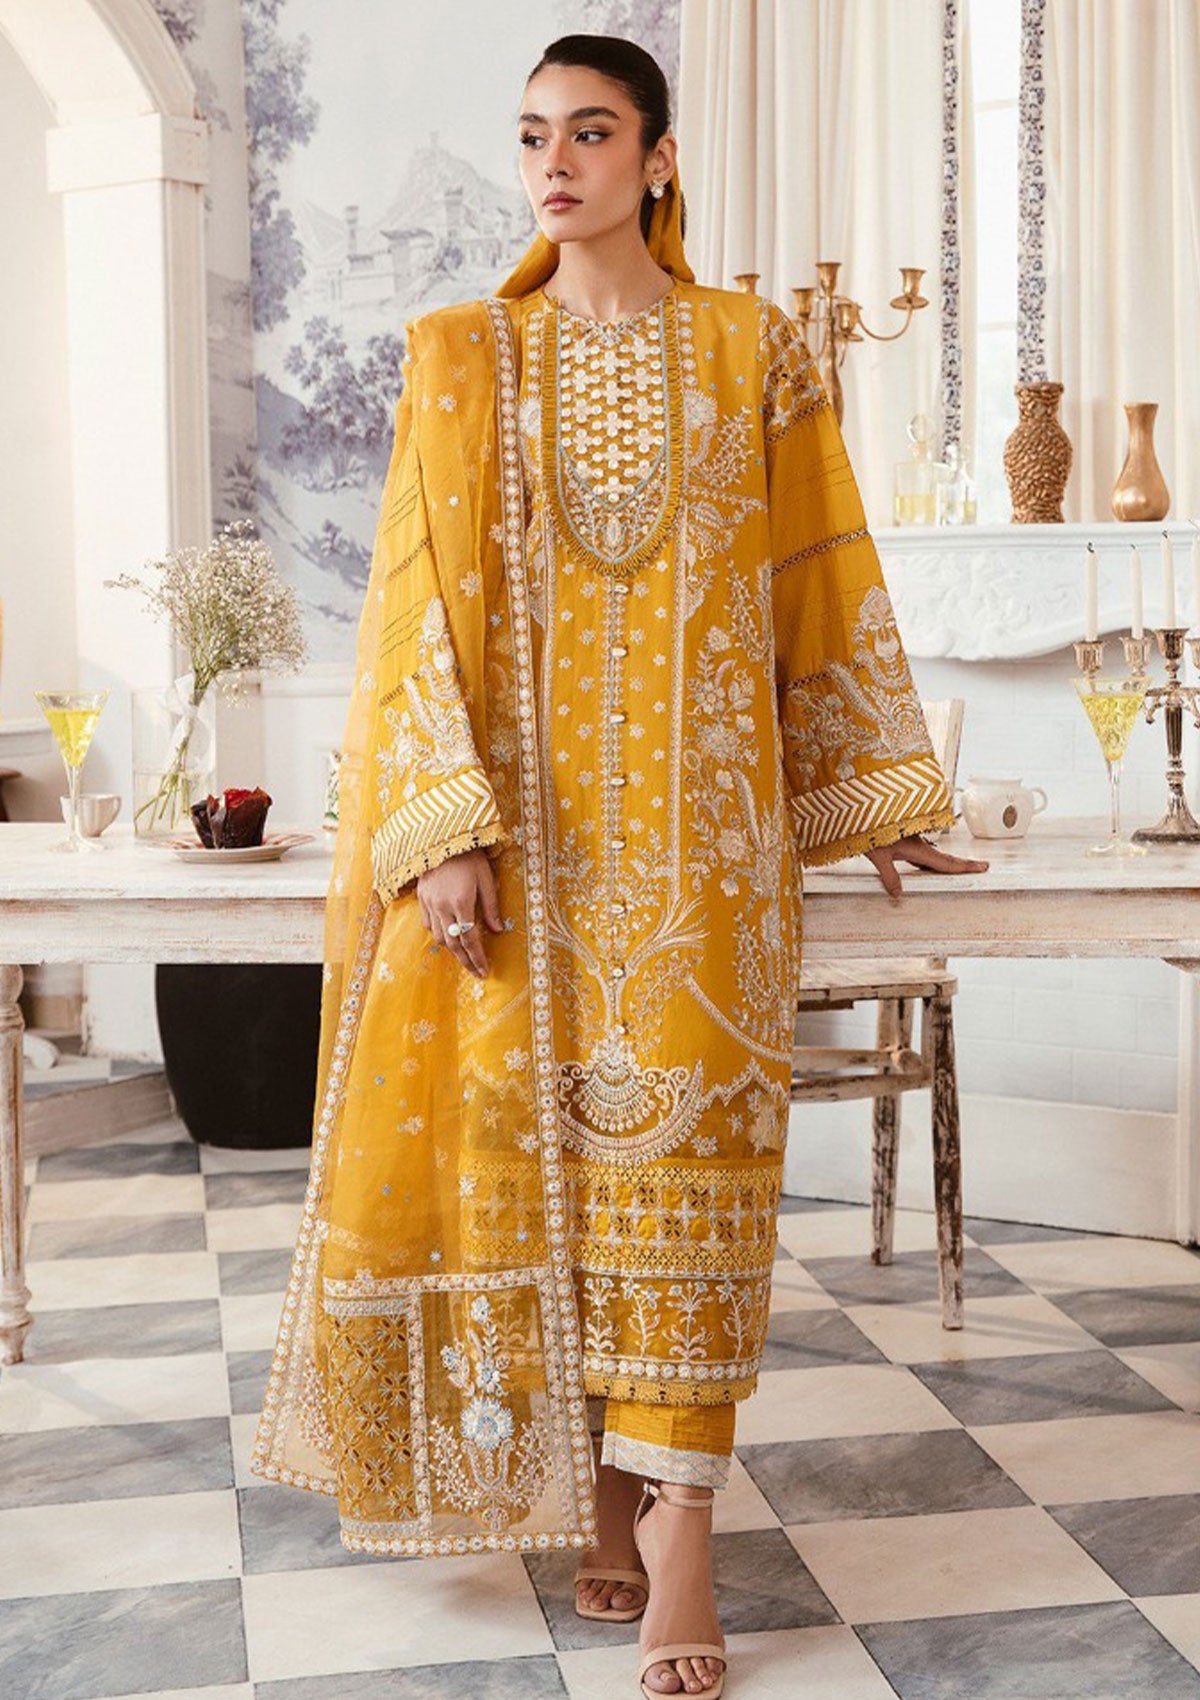 Lawn Collection - Gisele - Summerliness - Luxury - Marigold